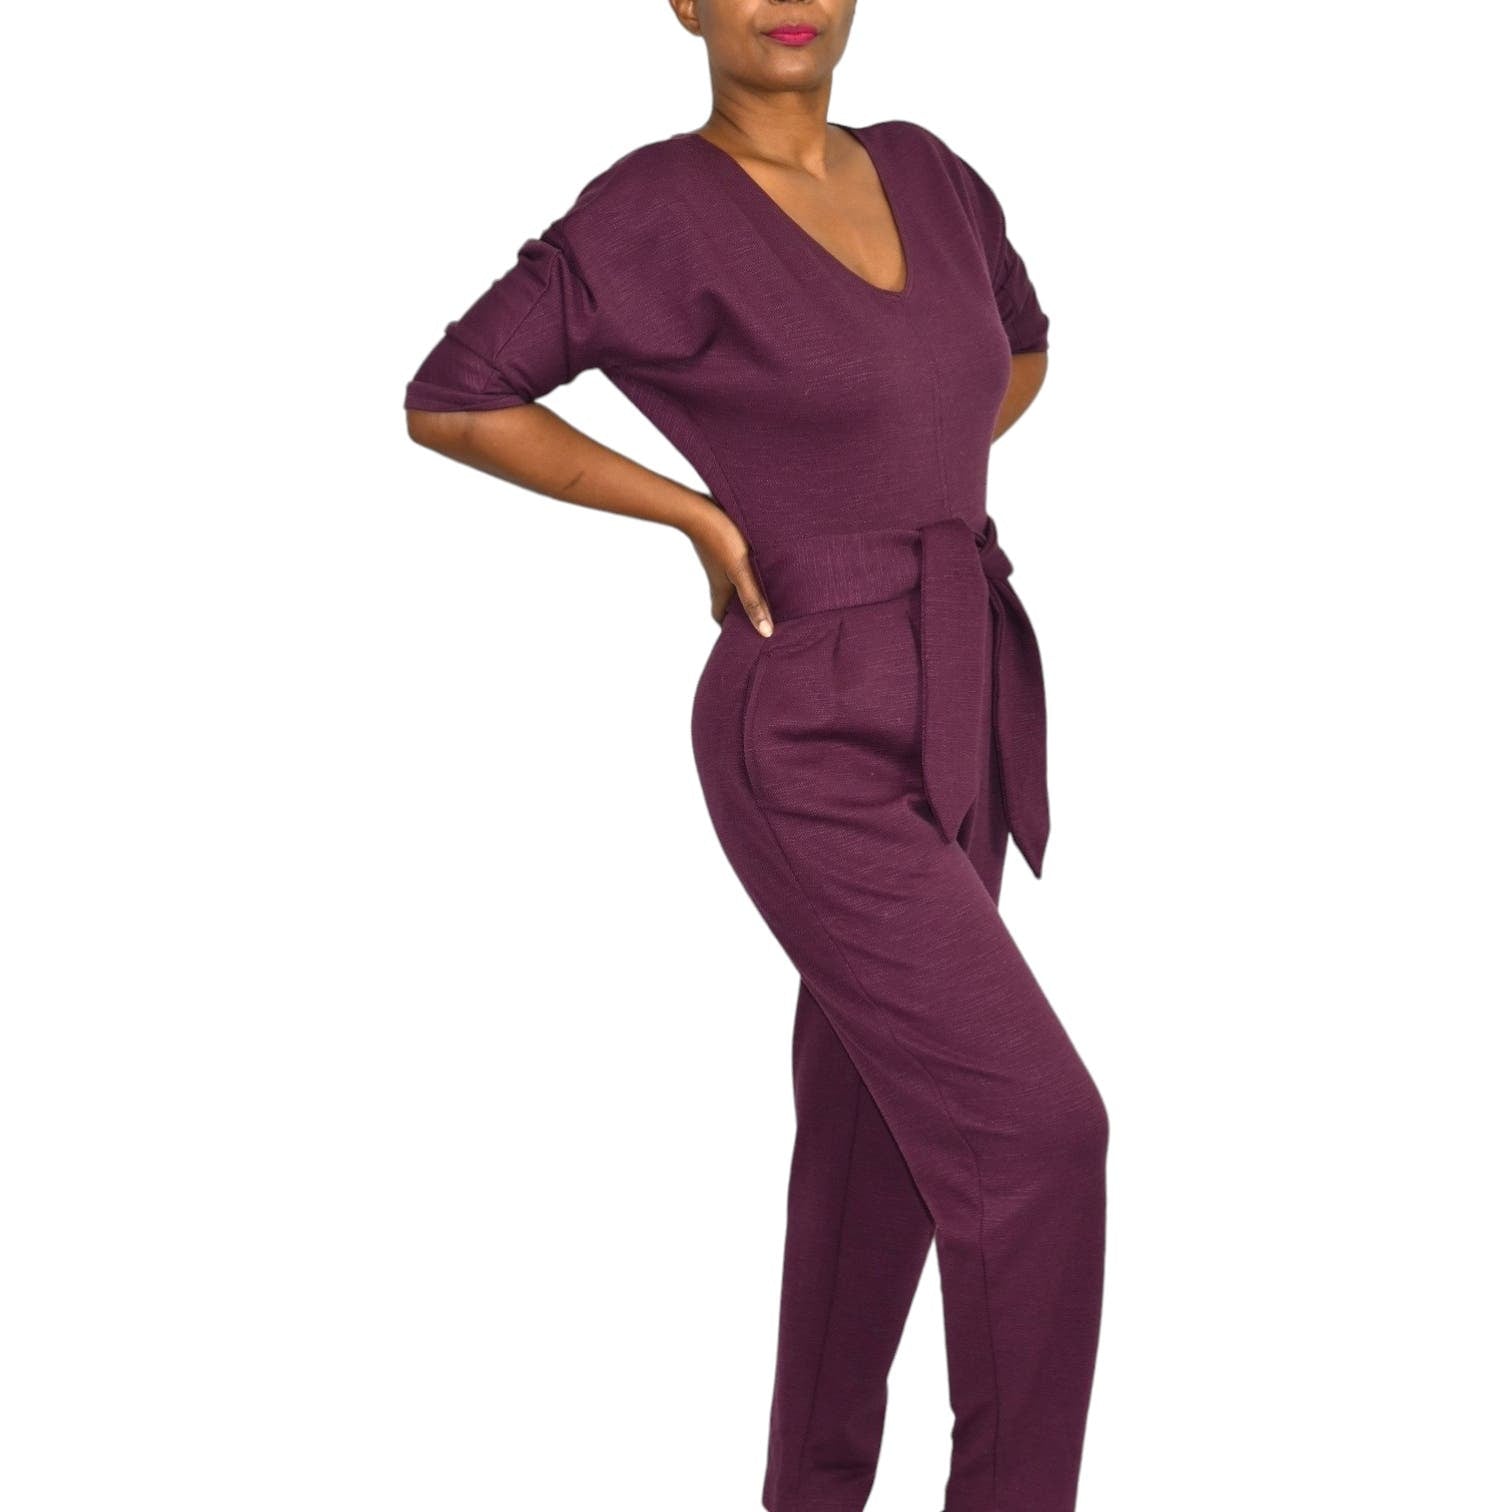 Anthropologie Sutton Jumpsuit Purple Plum Berry Ponte Knit Relaxed Belted Pants Size XS